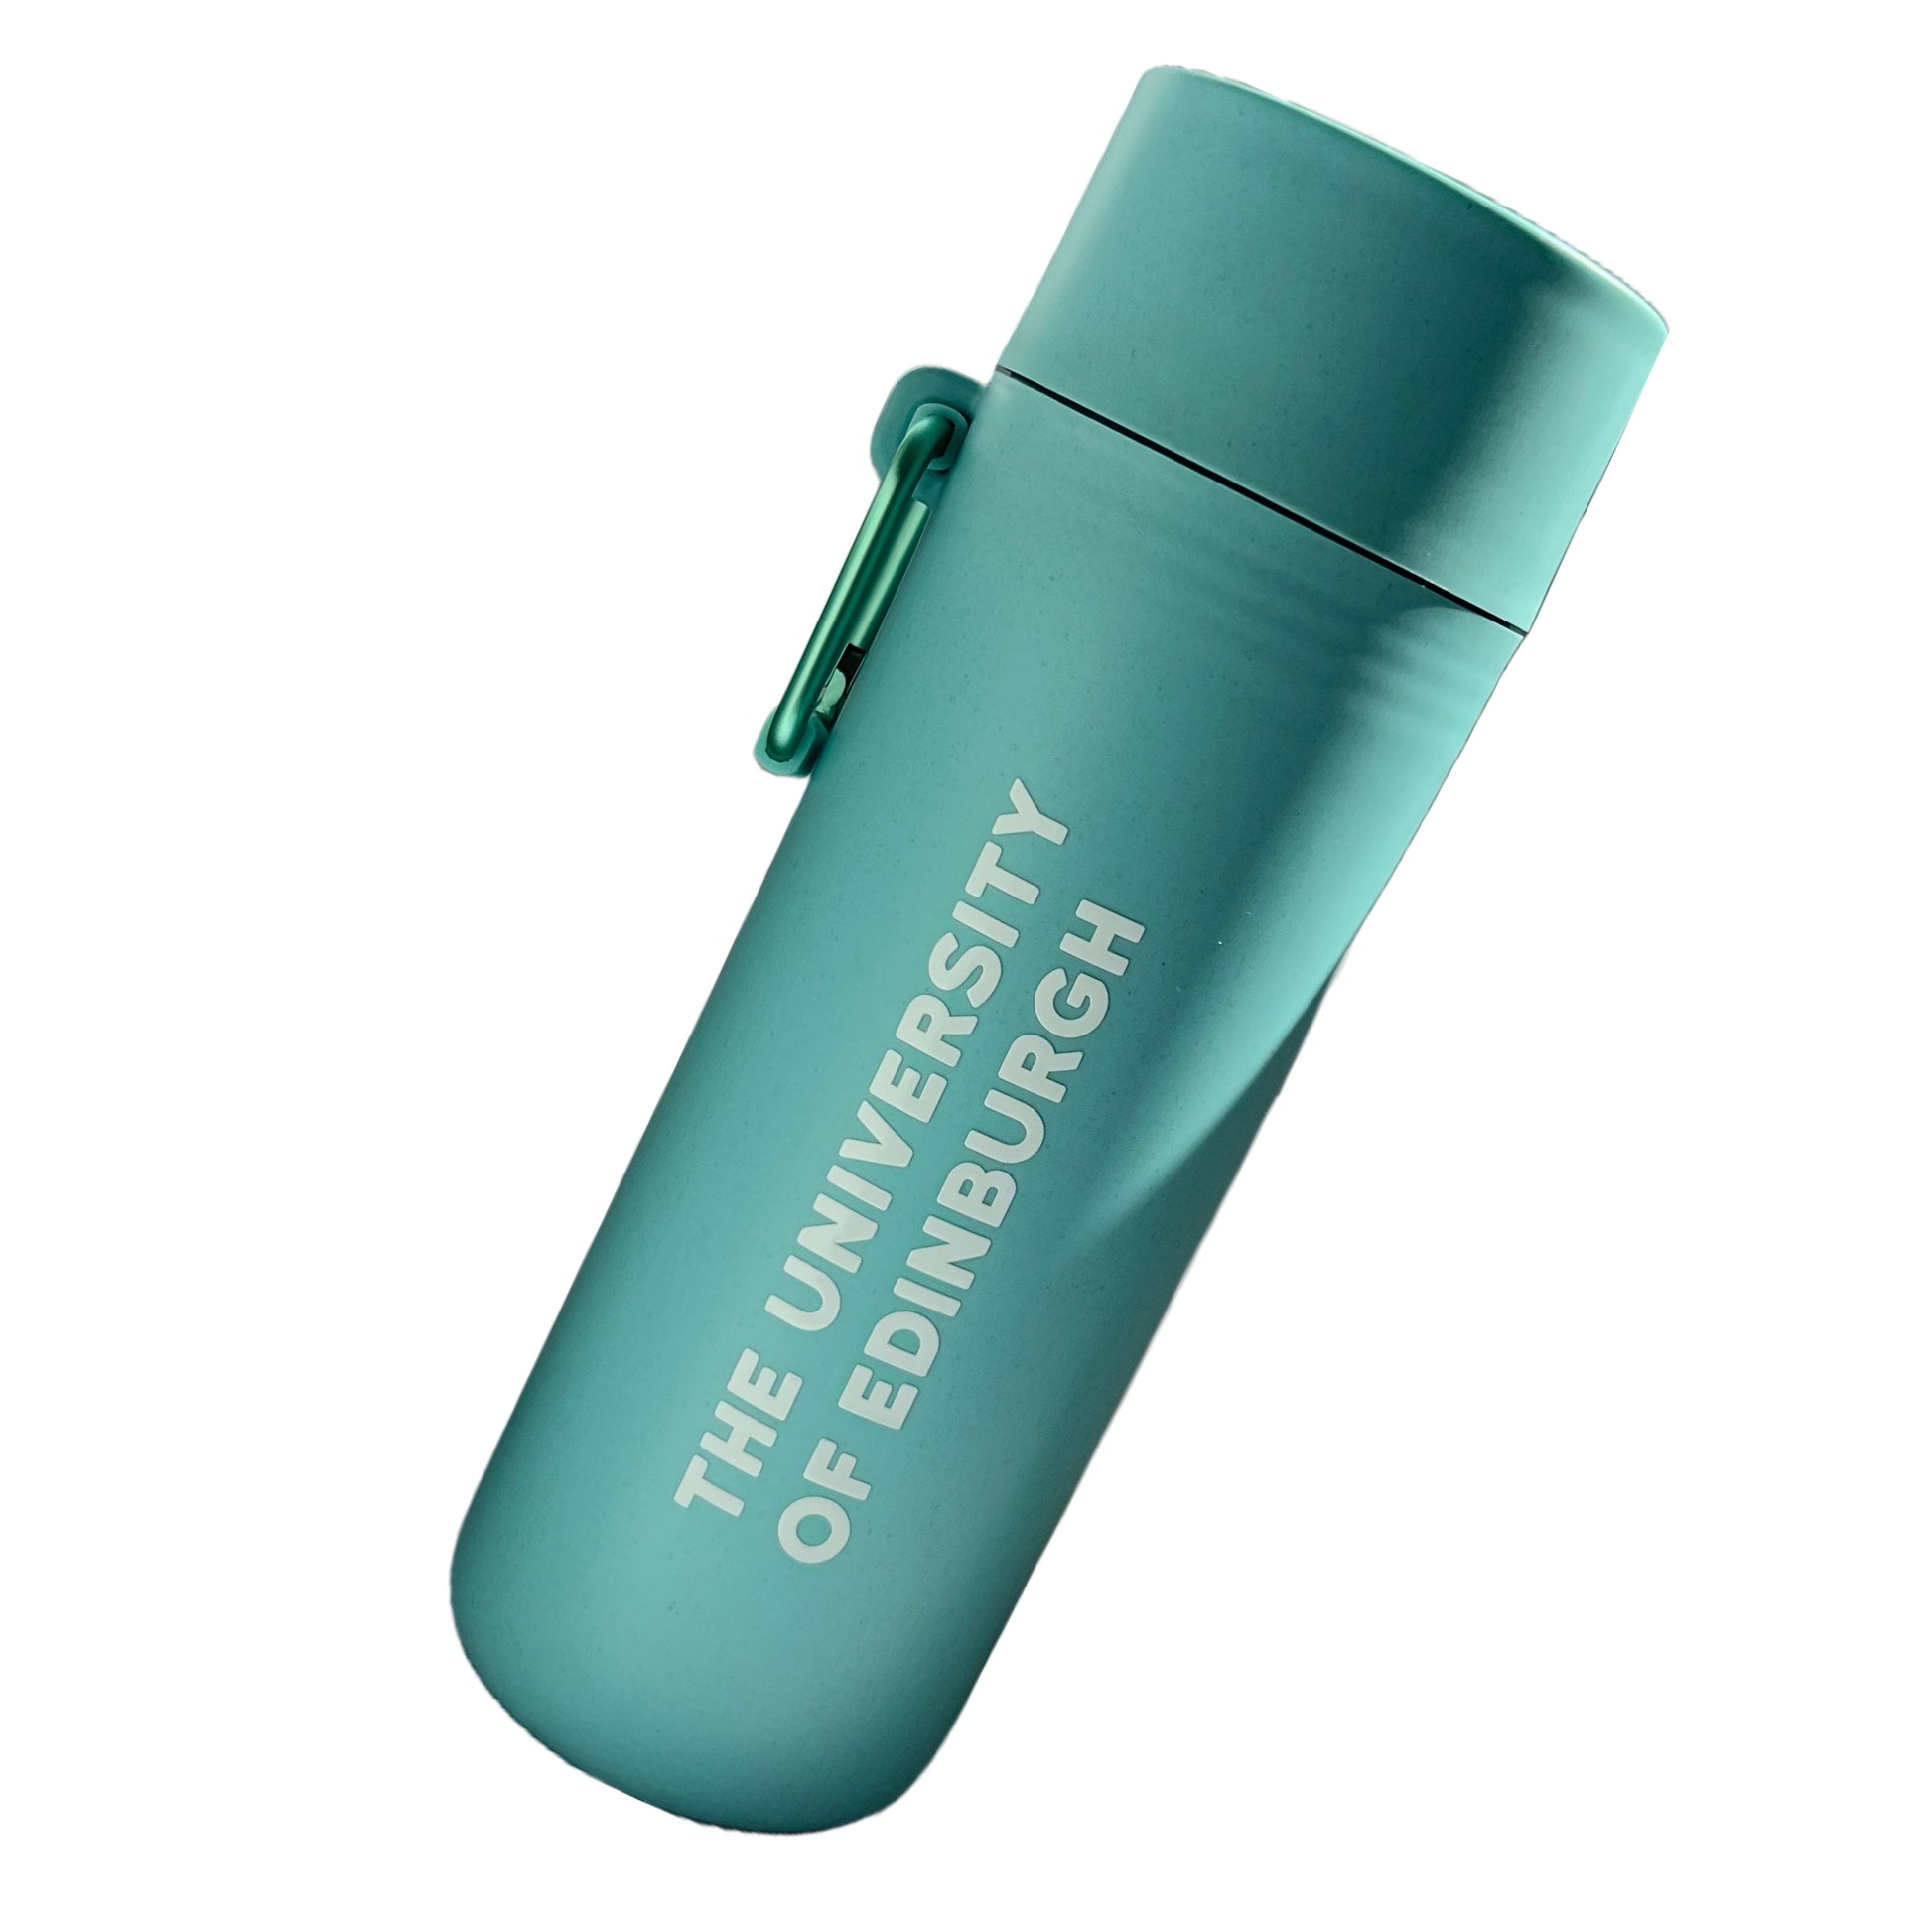 Swheat Water Bottle in Light Blue with University of Edinburgh text in white.